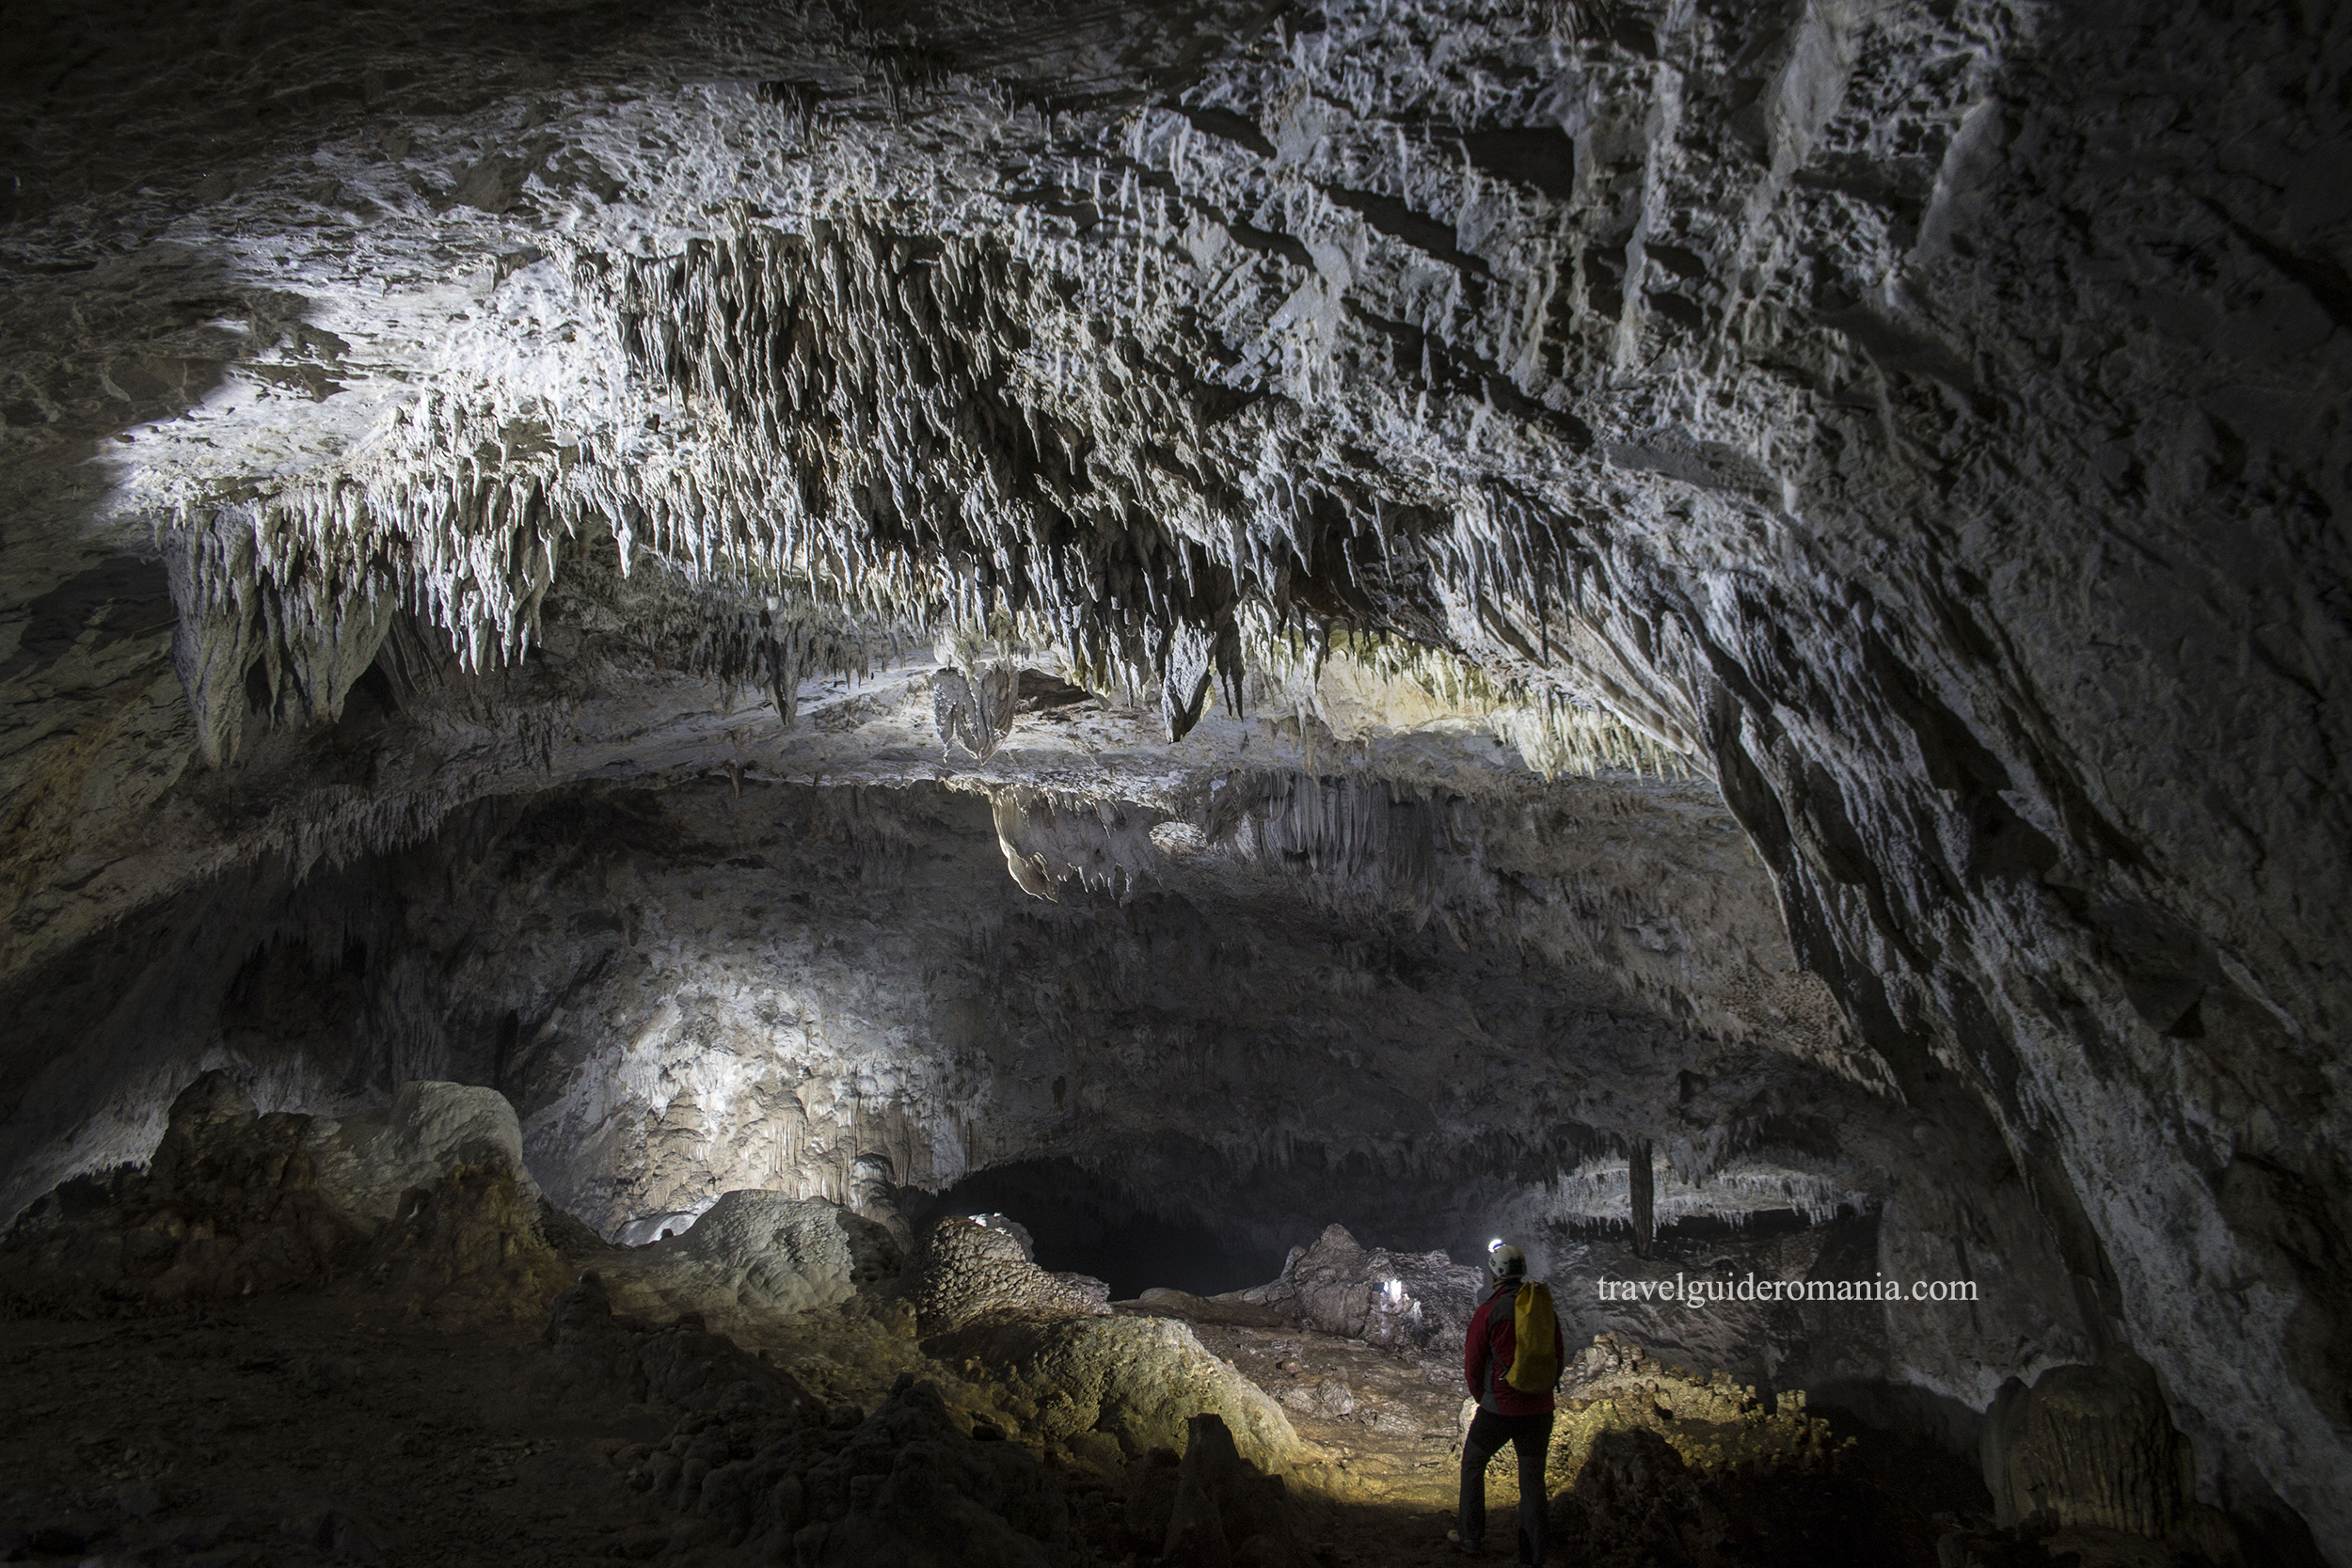 Meziad Cave - one of the most visited caves in Romania